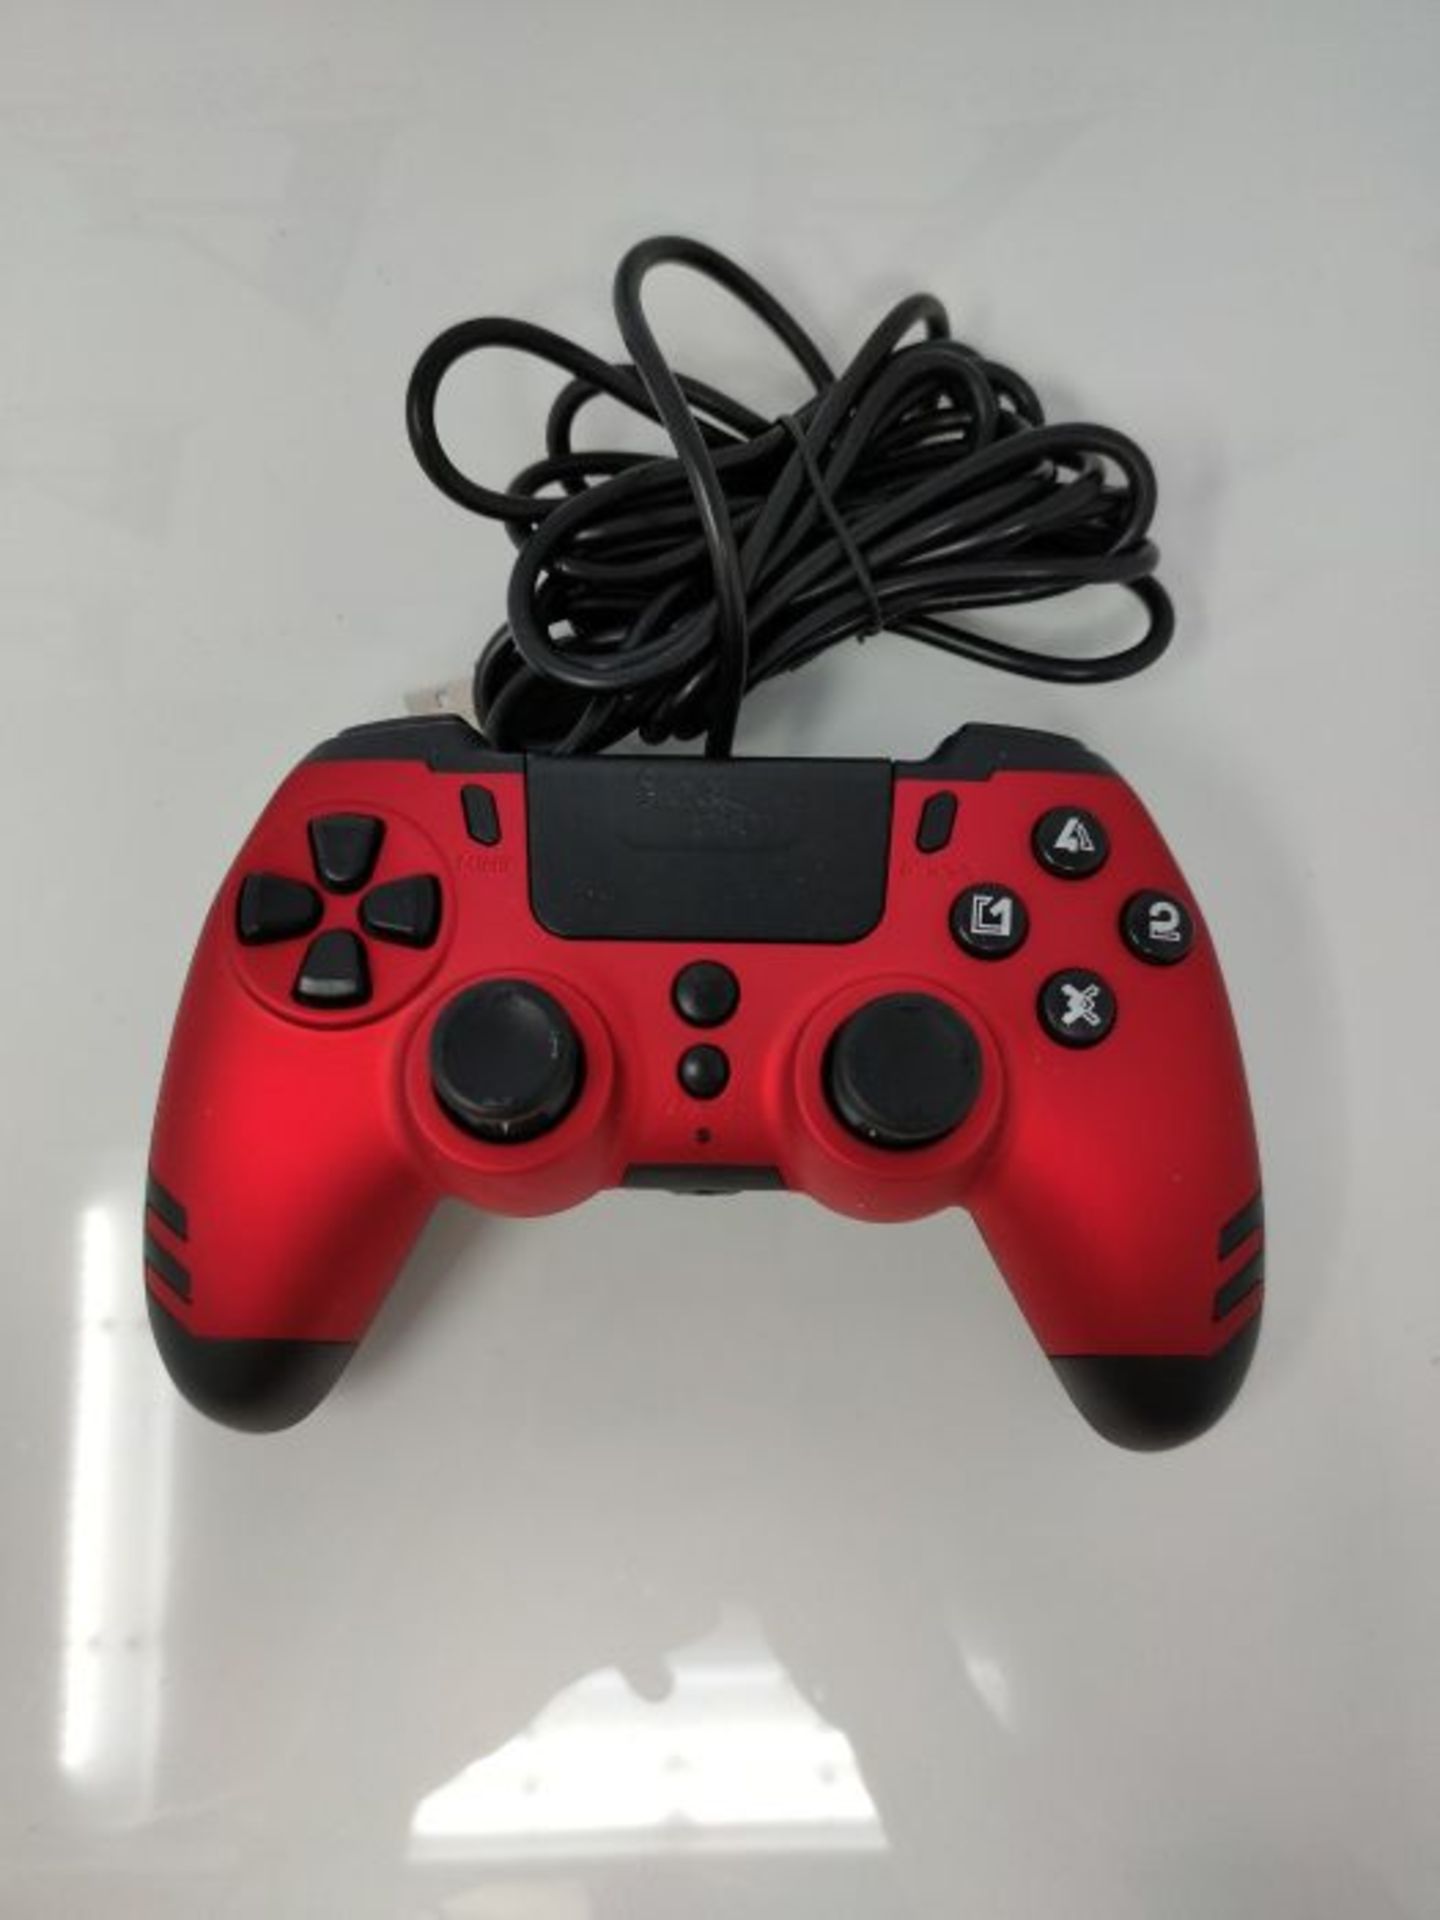 Steelplay - MetalTech Wired Controller (RED) (PS4) - Image 3 of 3